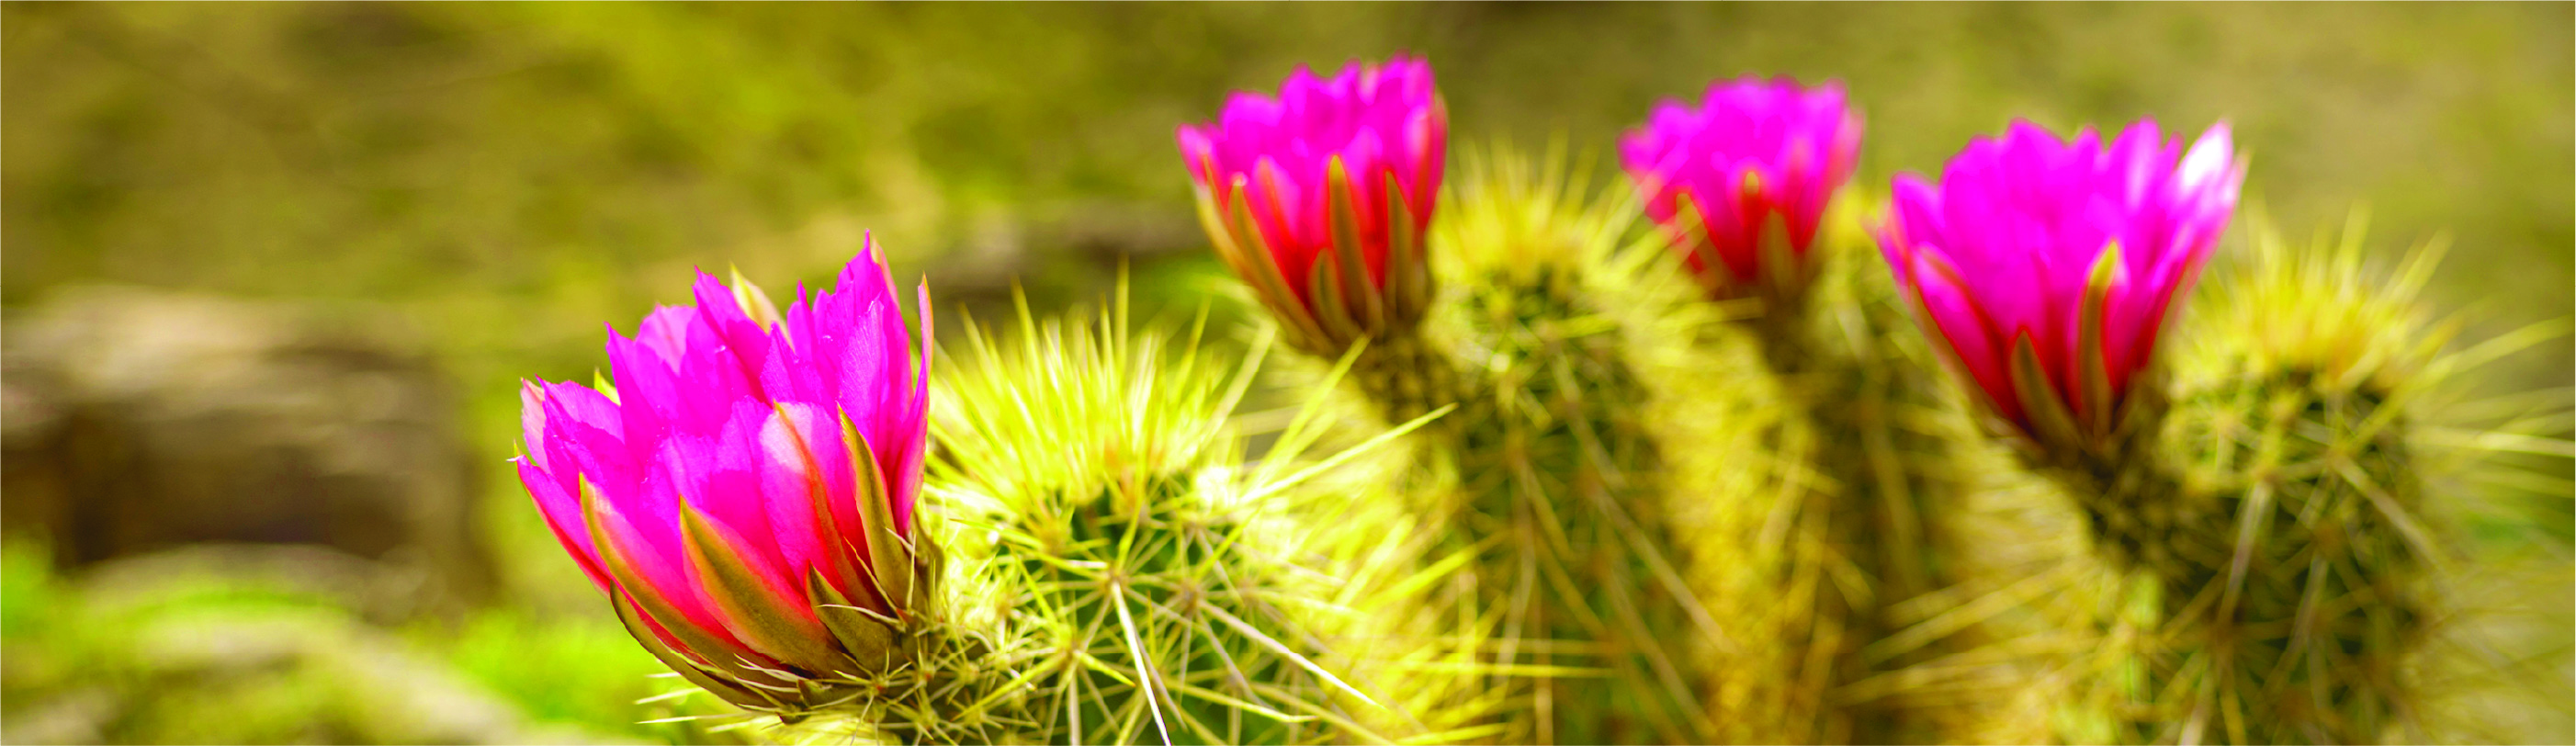 Pink Cactus Flowers in the Desert